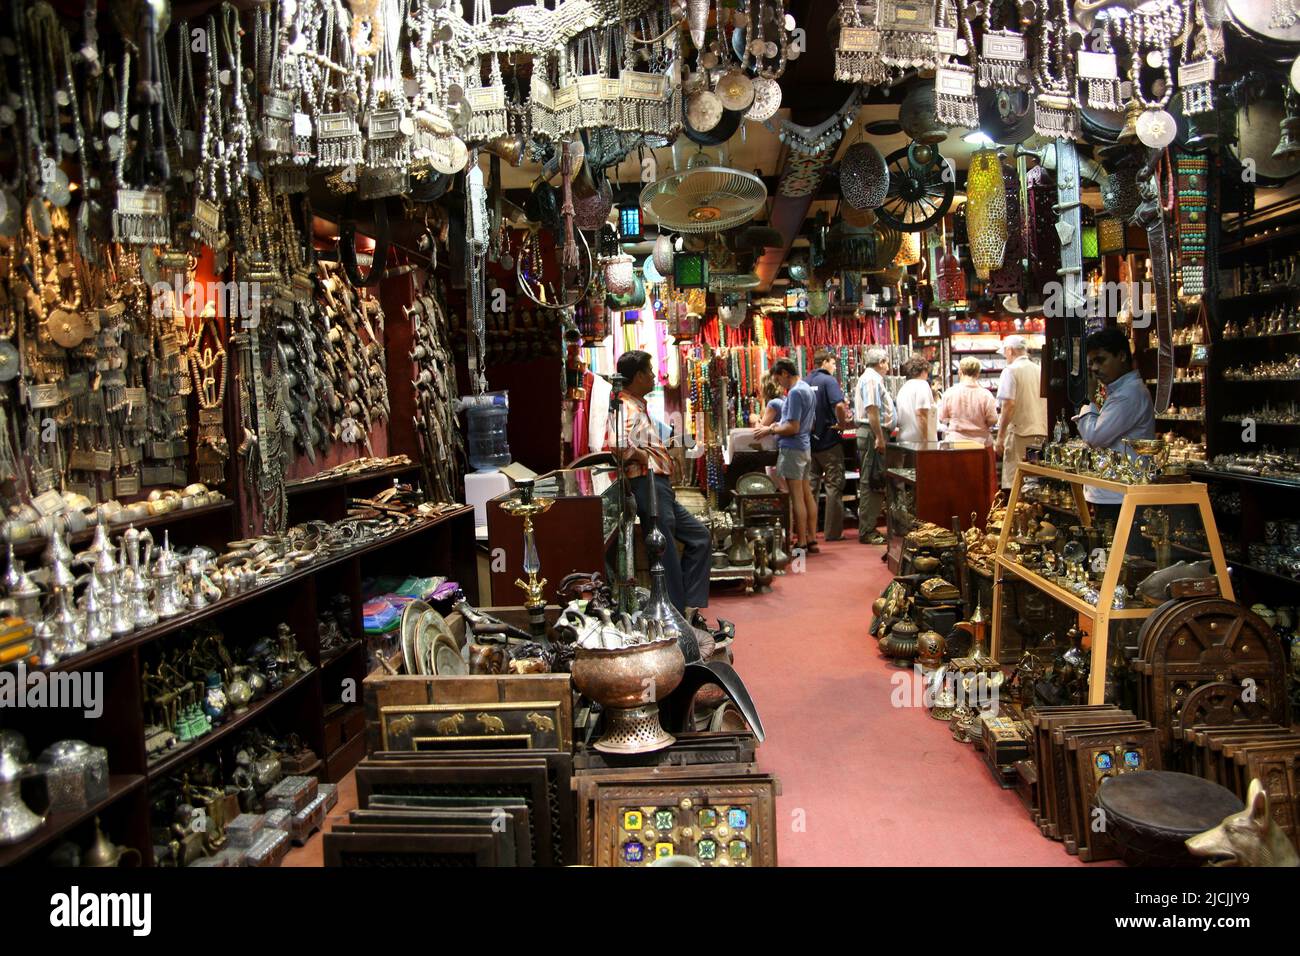 Antiques and crafts shop for tourists in Muttrah, souq, Sultanate of Oman Stock Photo